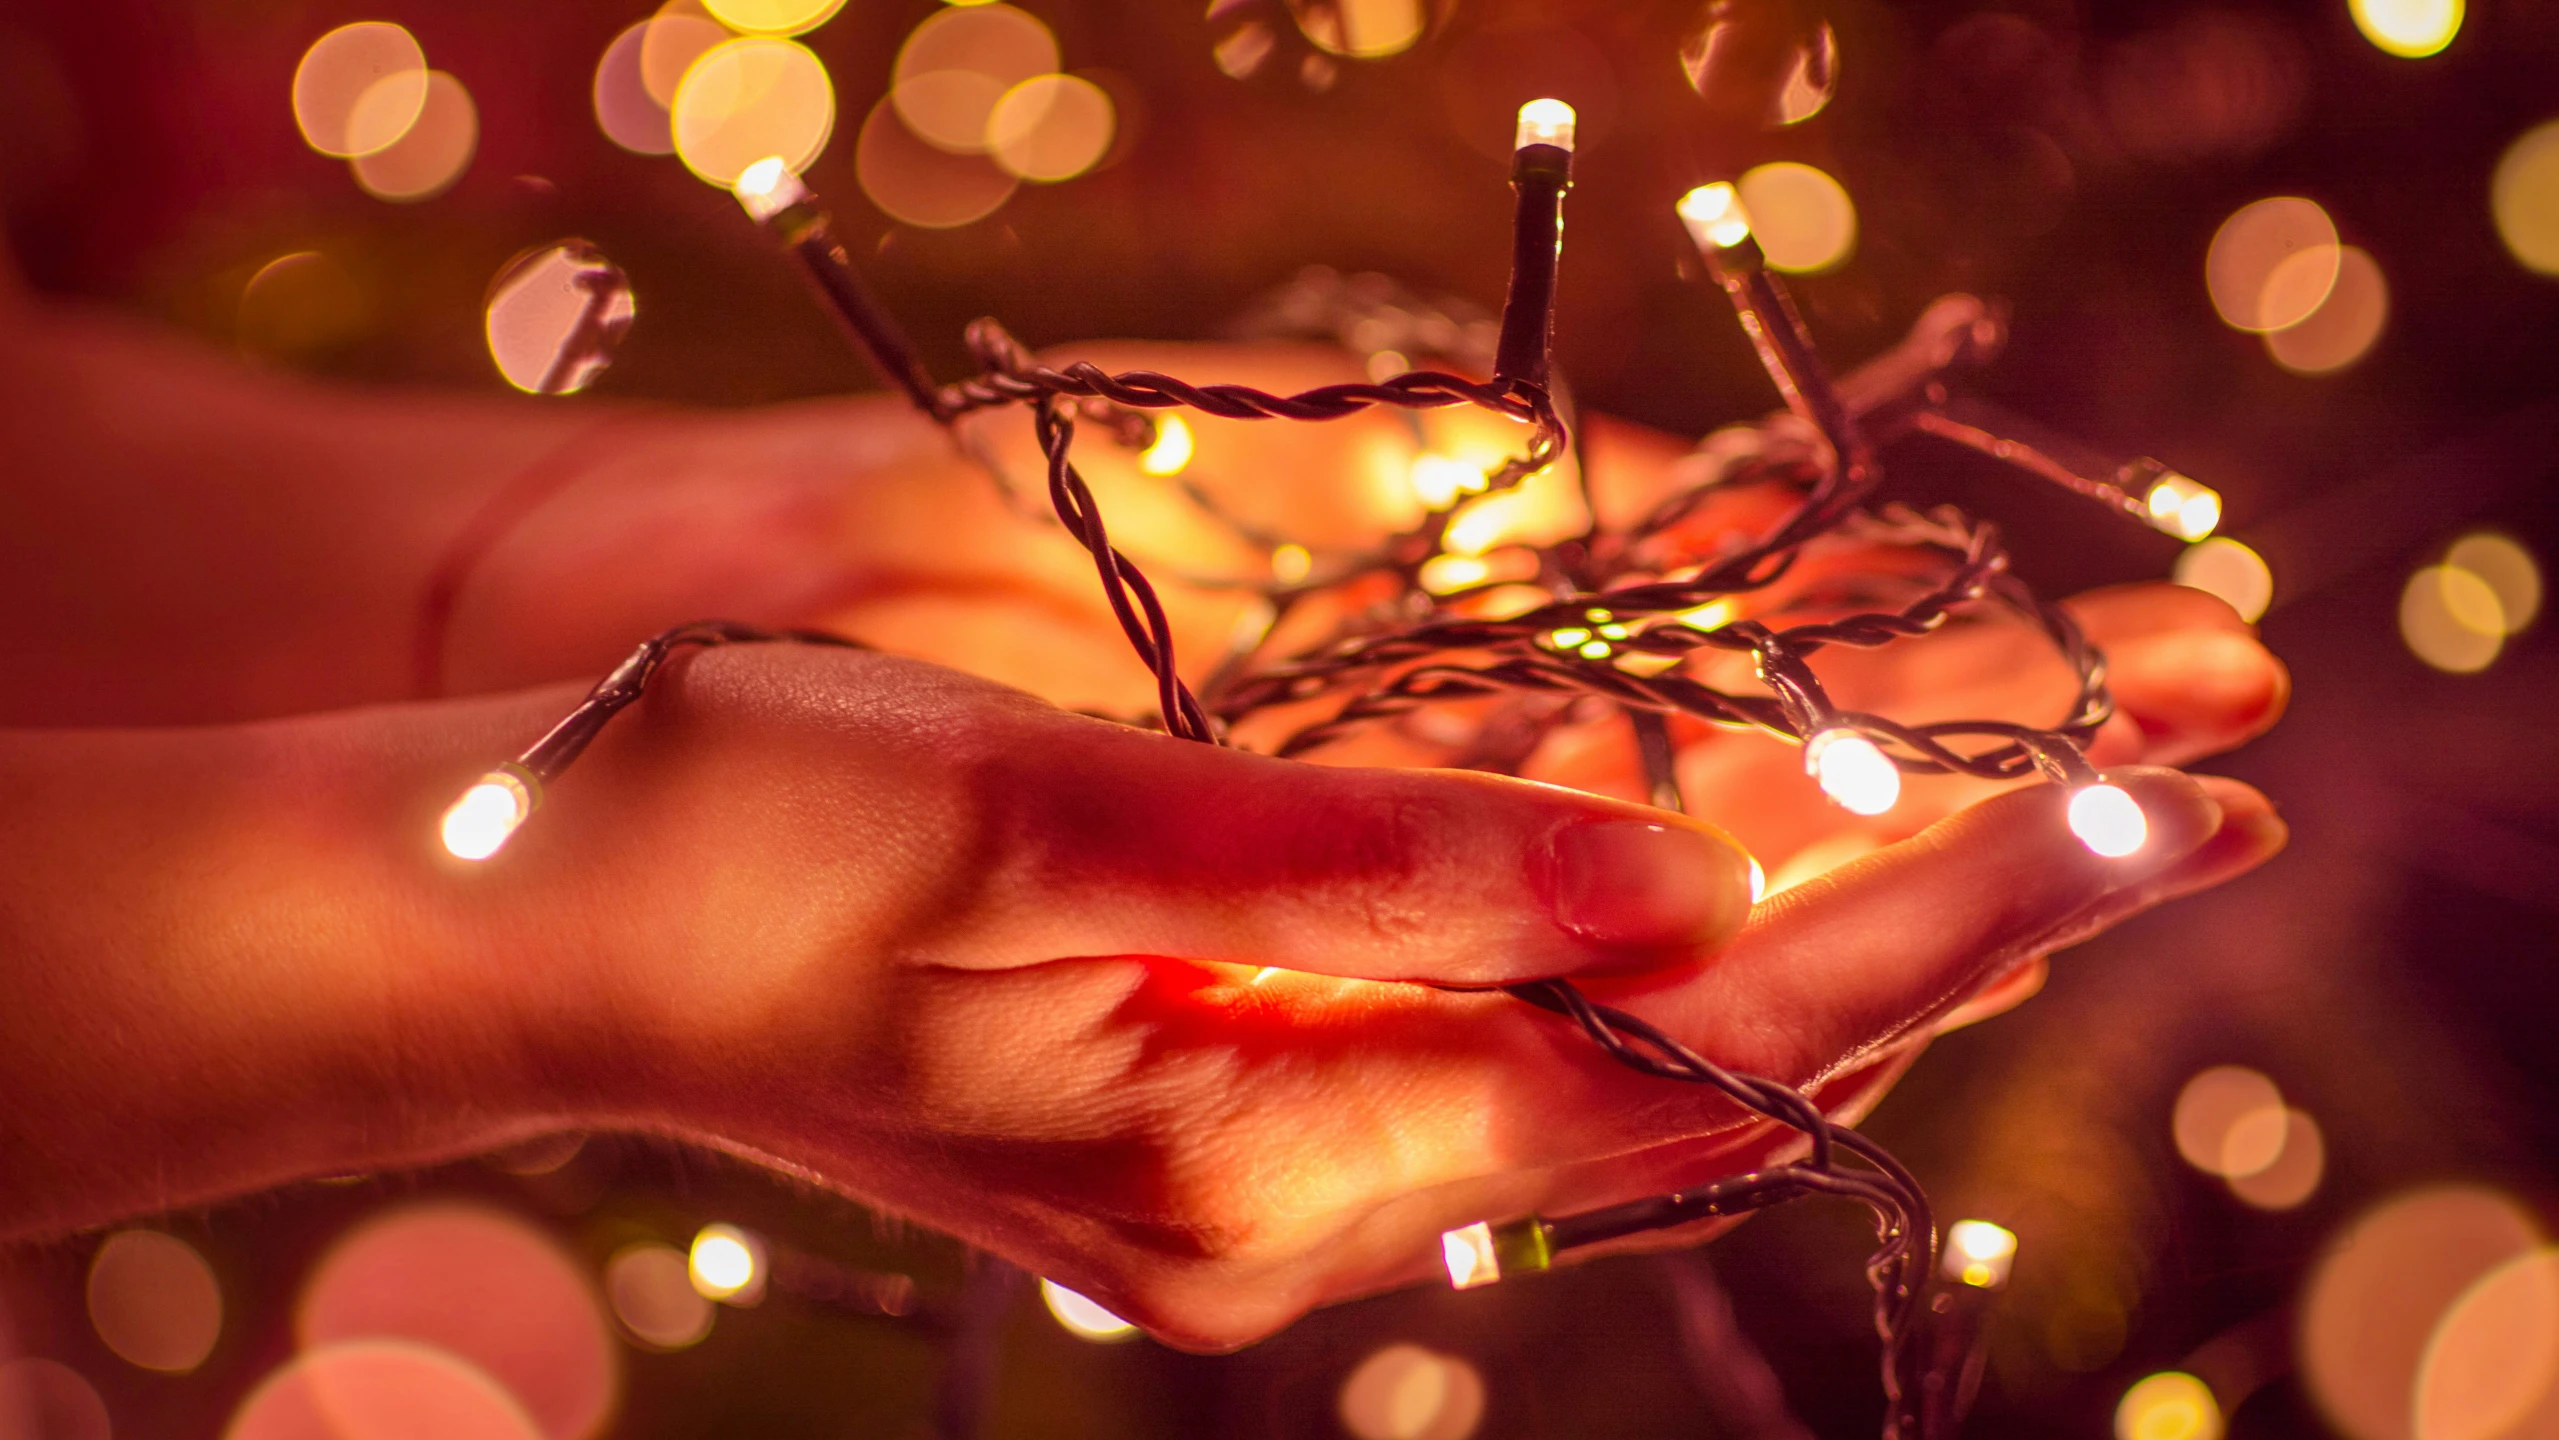 the lights of the small tree are in someone's hand